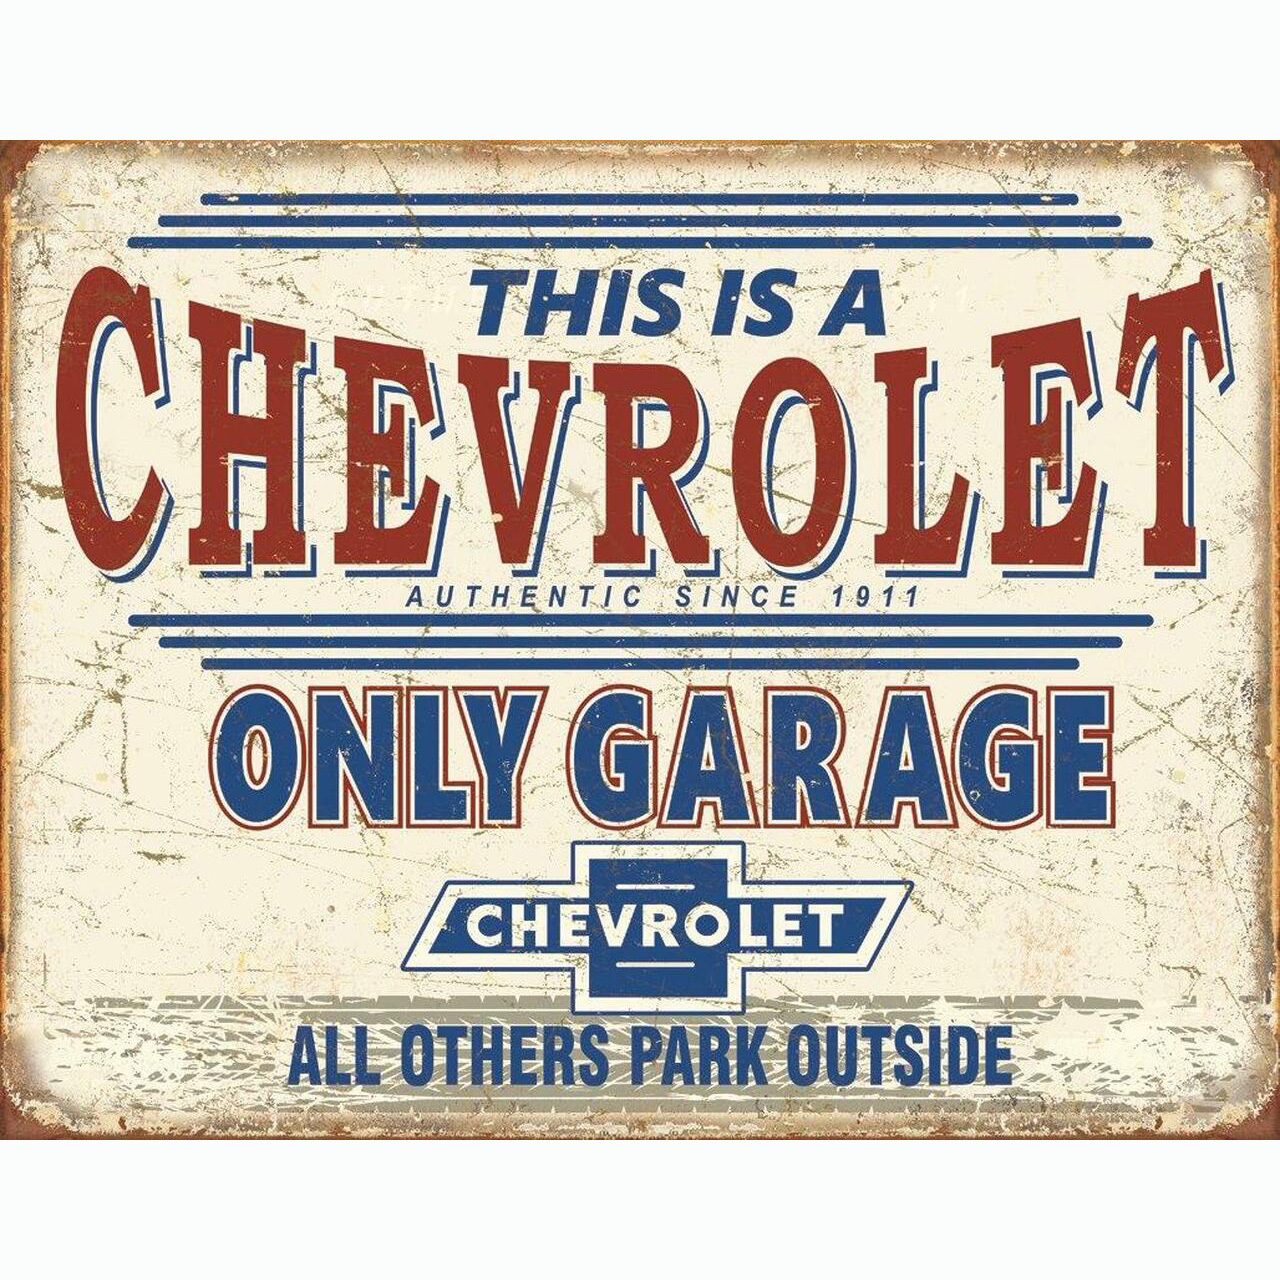 CHEVROLET CHEVY 454 TURBO JET  EMBOSSED  METAL SIGNS MAN CAVE  GARAGE Cool! 